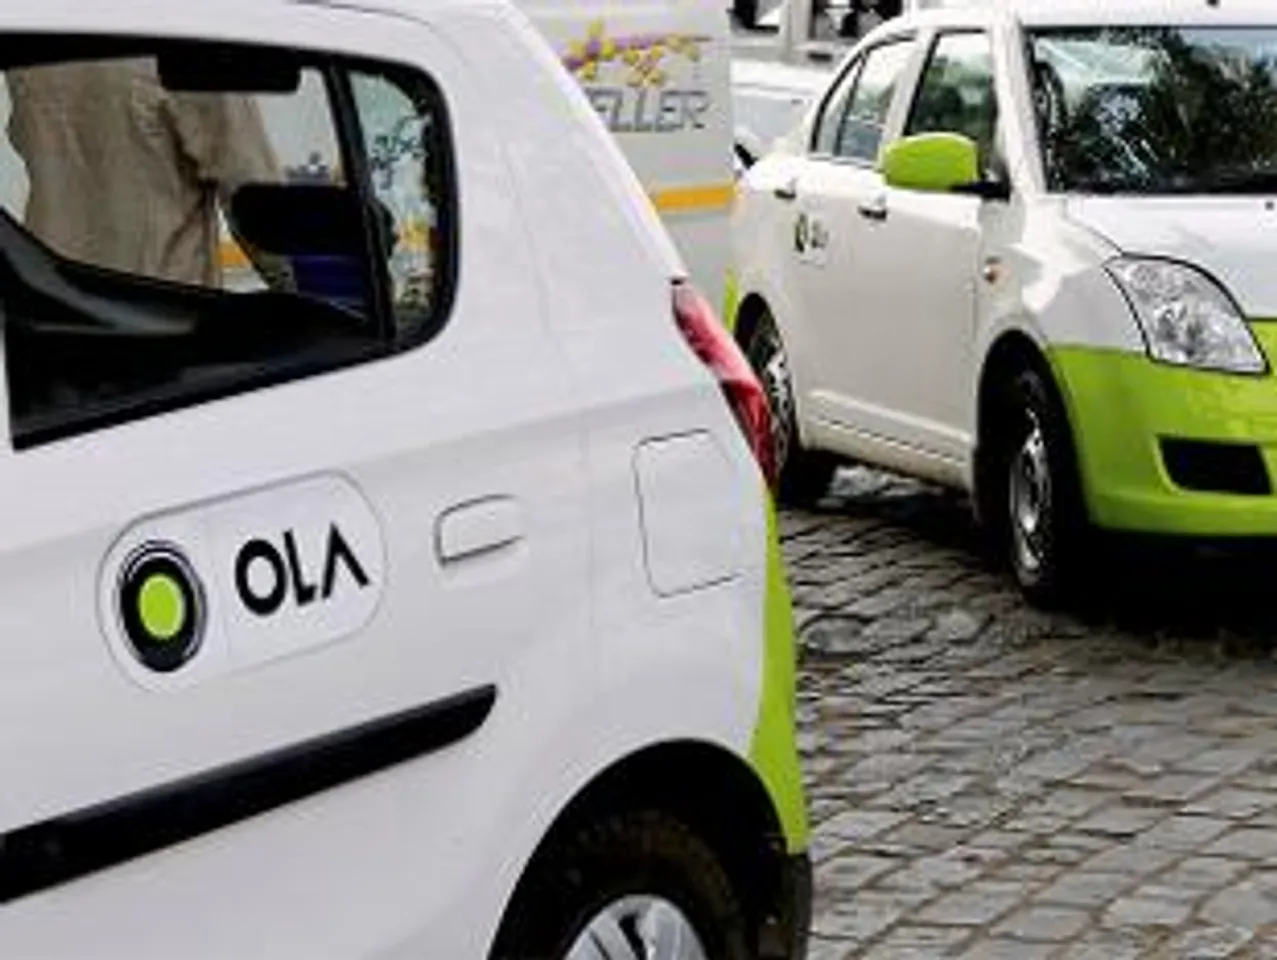 Ola to get electric cabs in major Indian cities